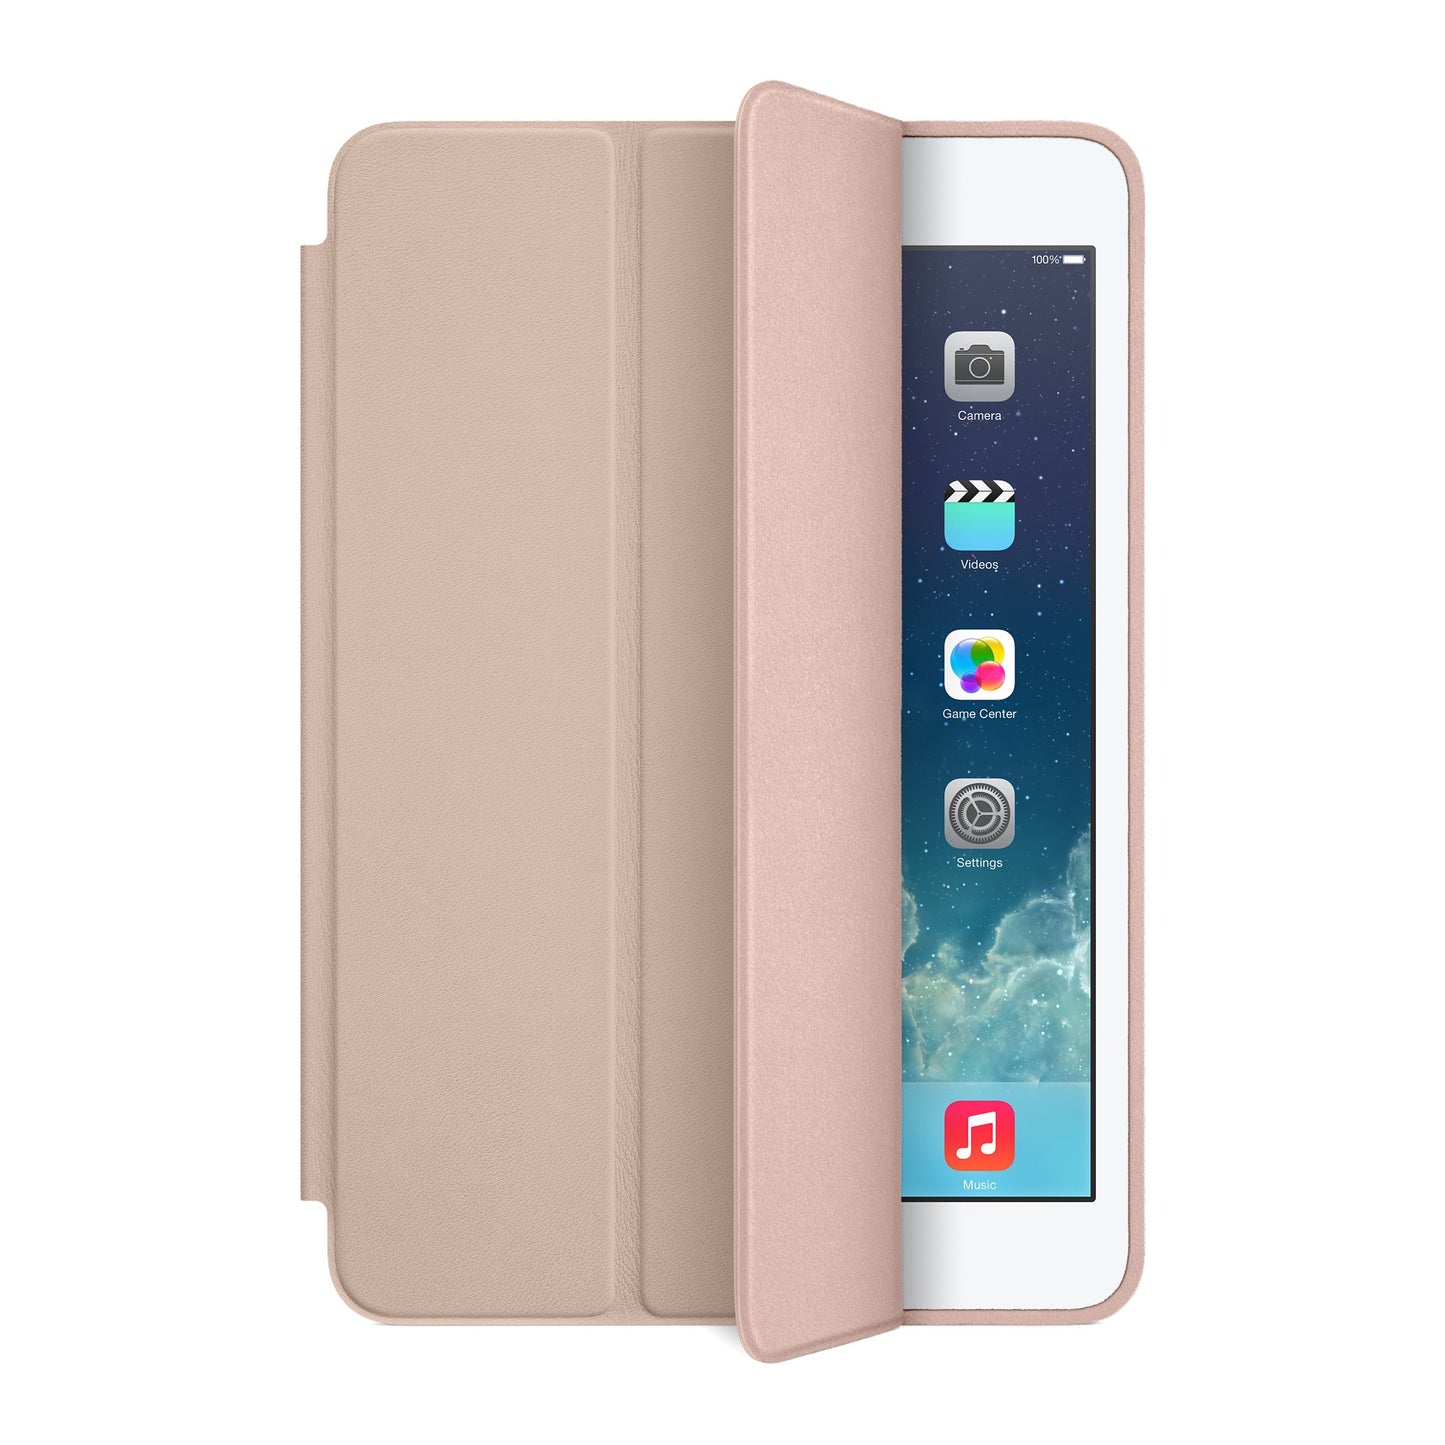 Apple Carrying Case for iPad mini - Beige